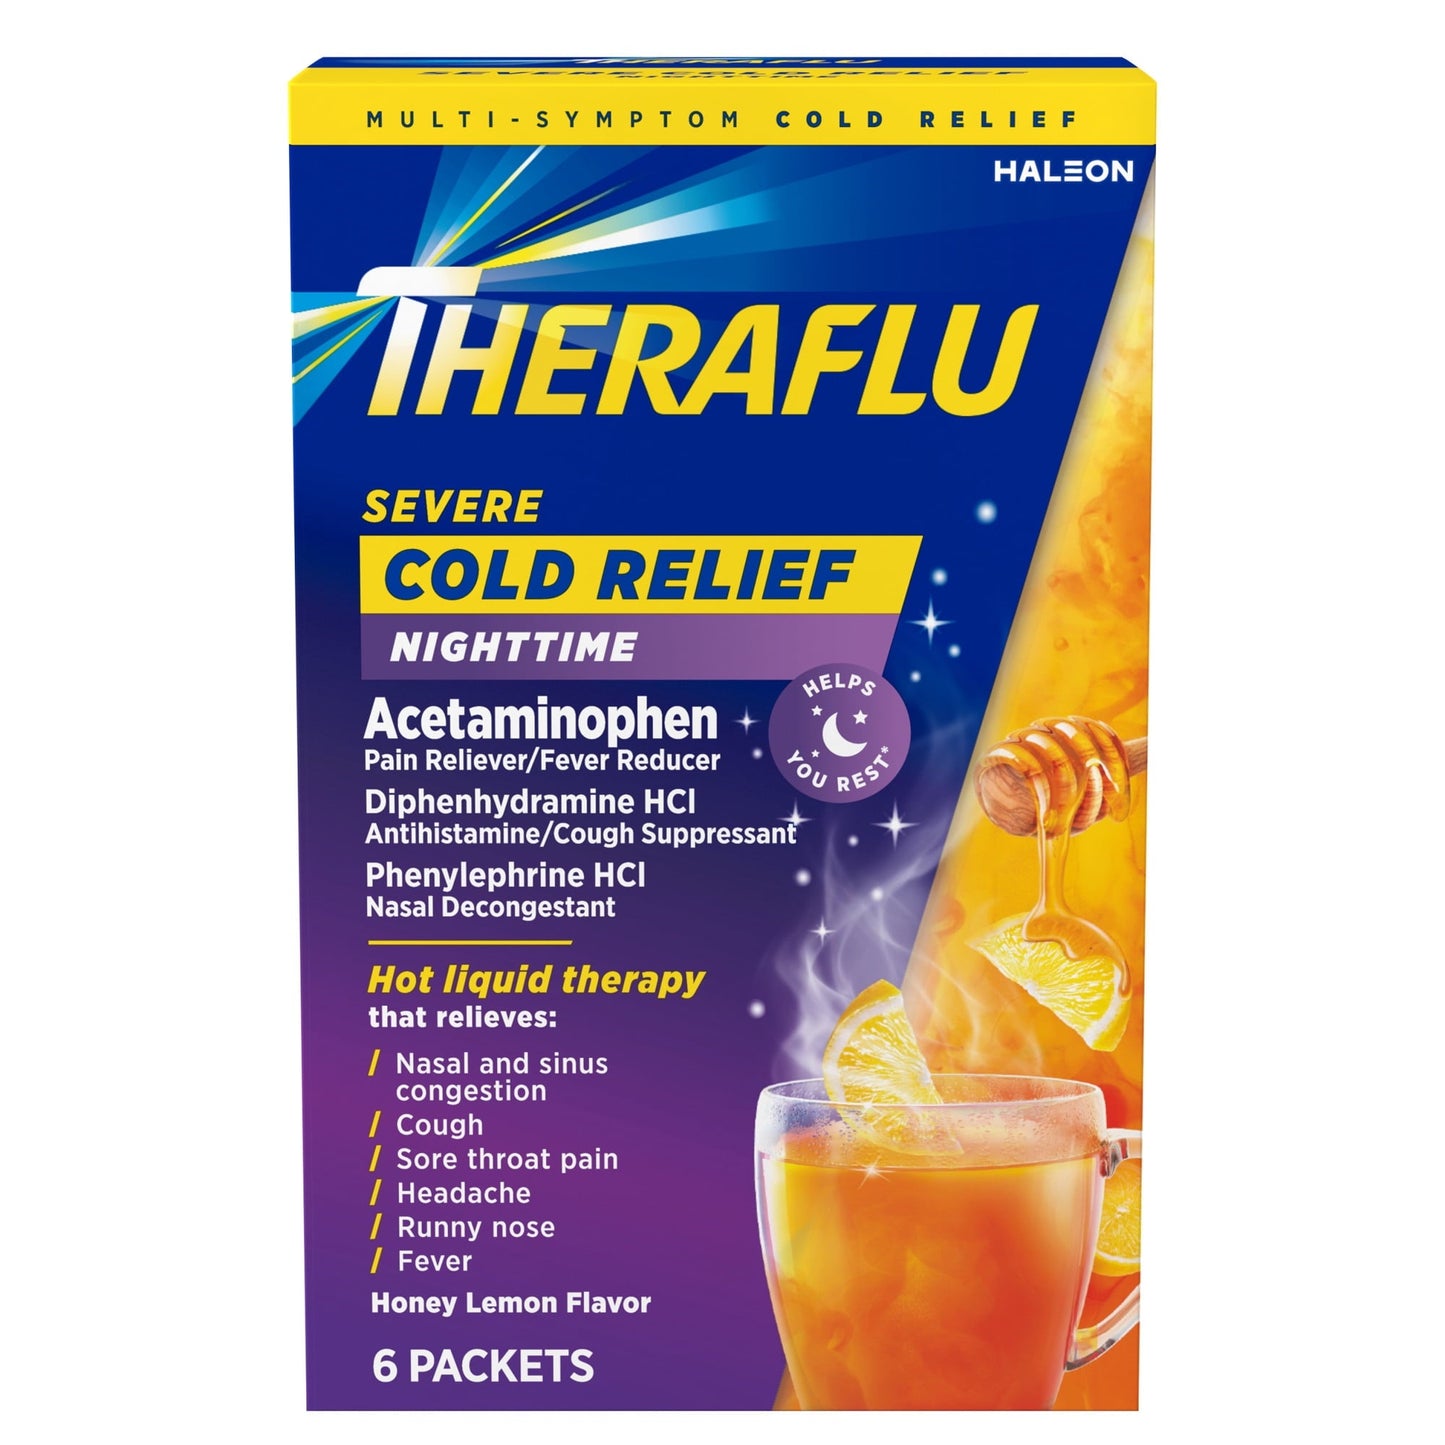 Theraflu Severe Cough Cold and Flu Nighttime Relief Medicine Powder, White Tea and Honey Lemon, 6 Count